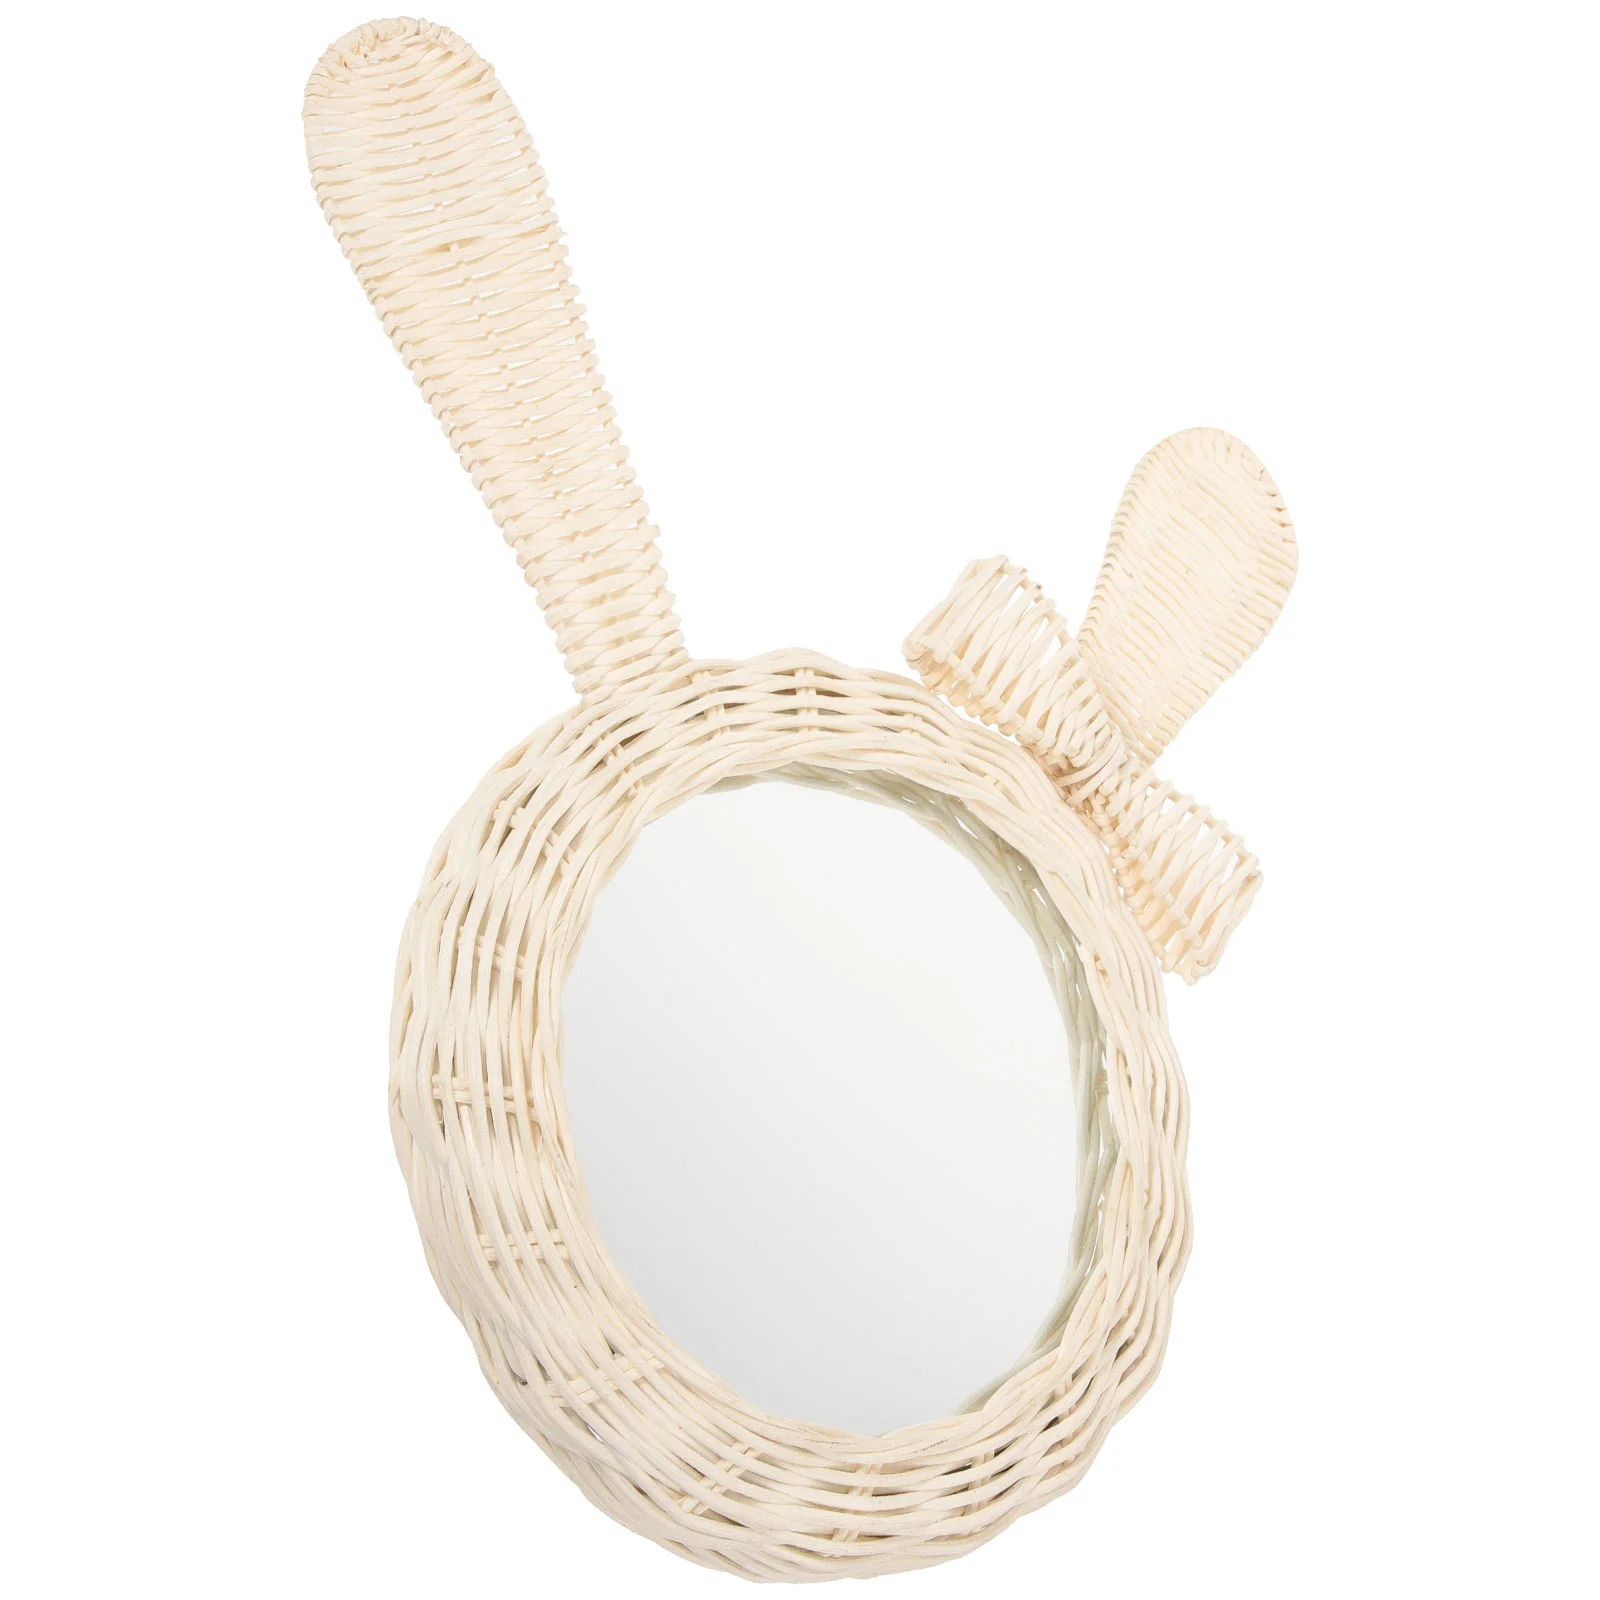 

Makeup Mirror Rattan Office Vanity Large Small Hanging Decor Decorative Mirrors Wall